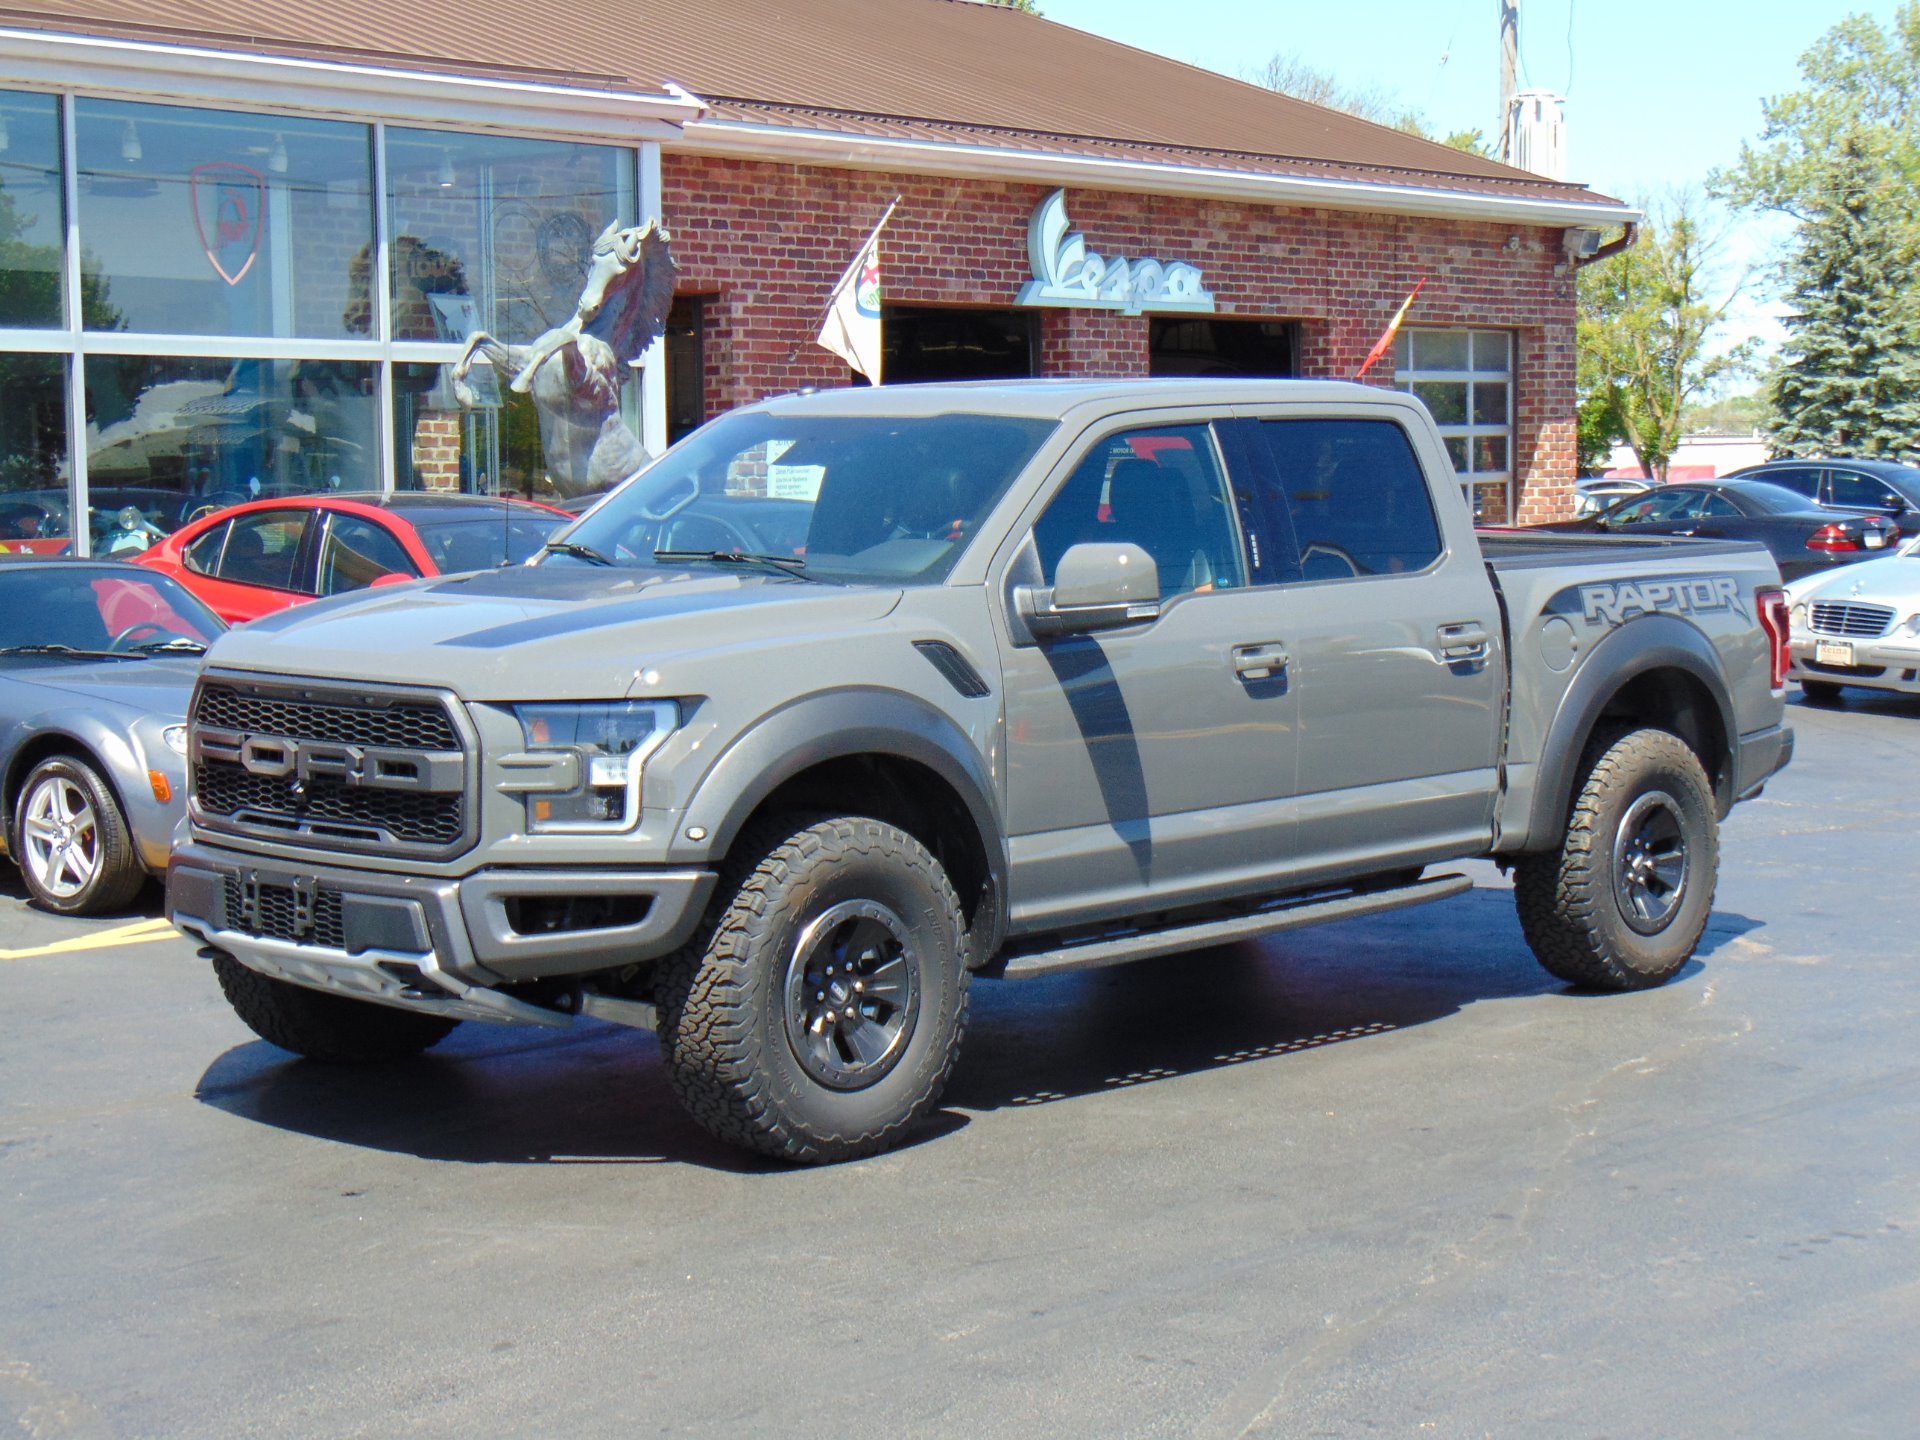 2018 Ford F-150 Raptor Stock # 4743 for sale near Brookfield, WI | WI ...